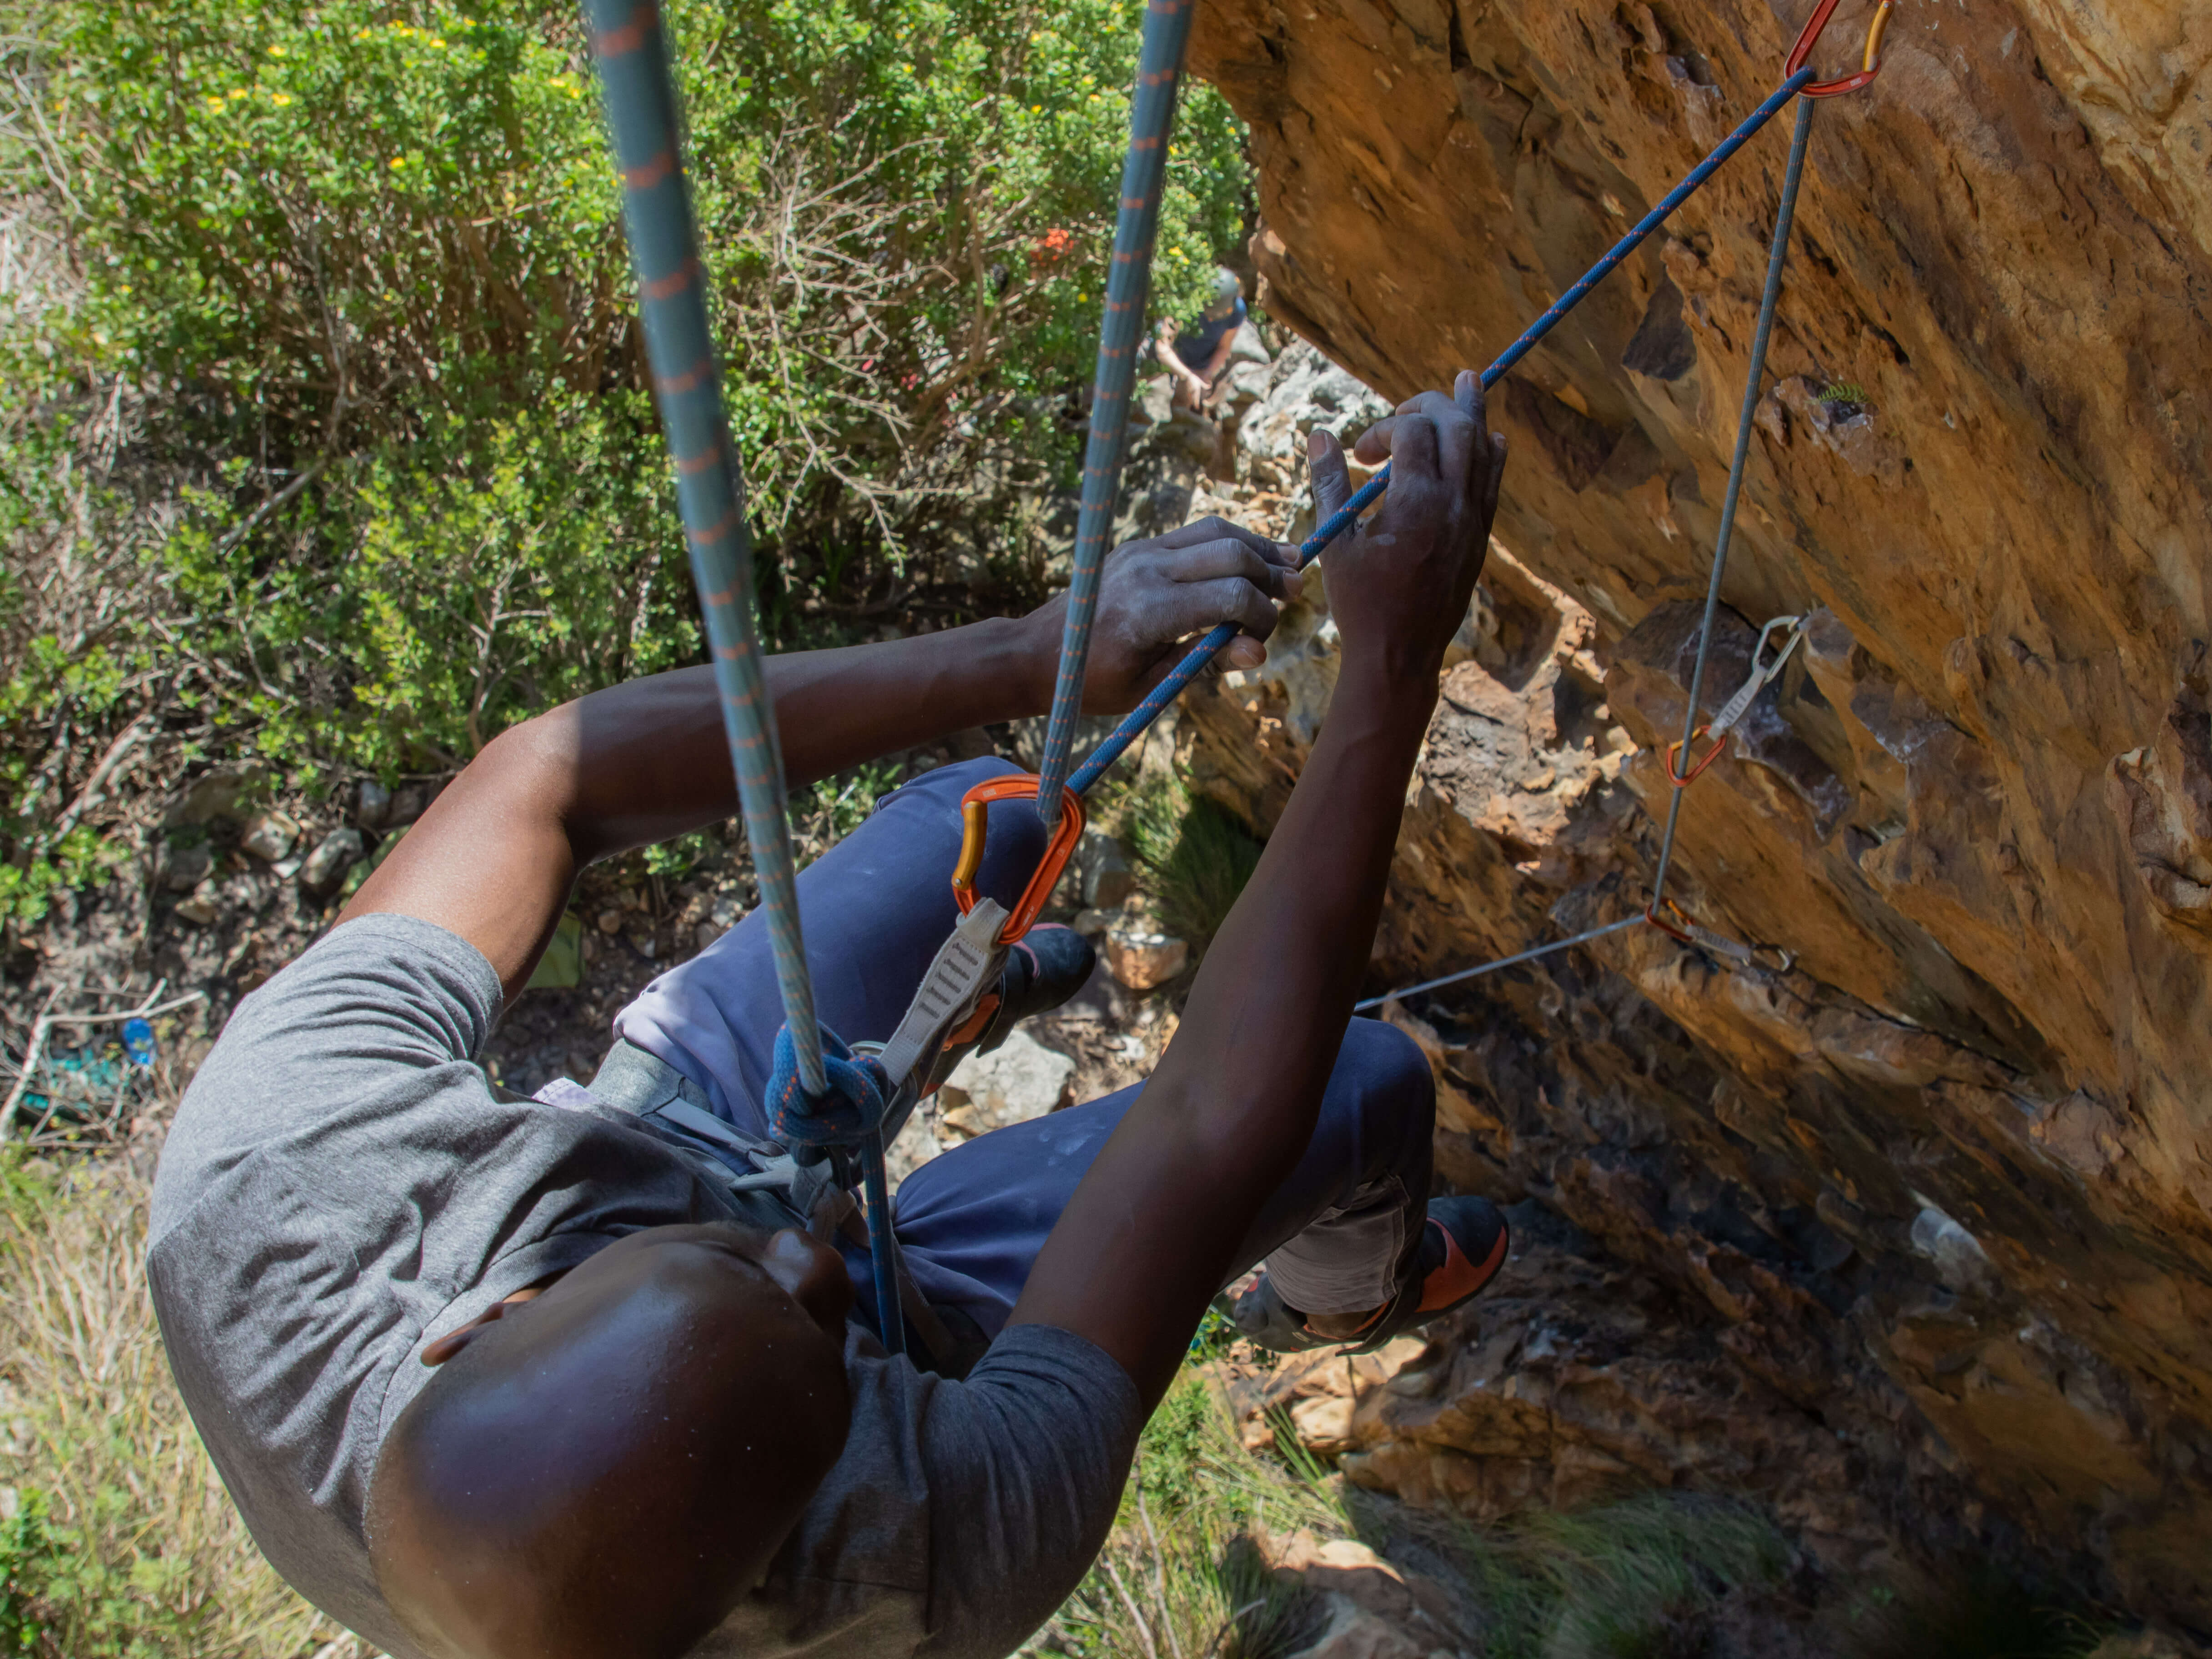 climber tramming down rope while retrieving quickdraws